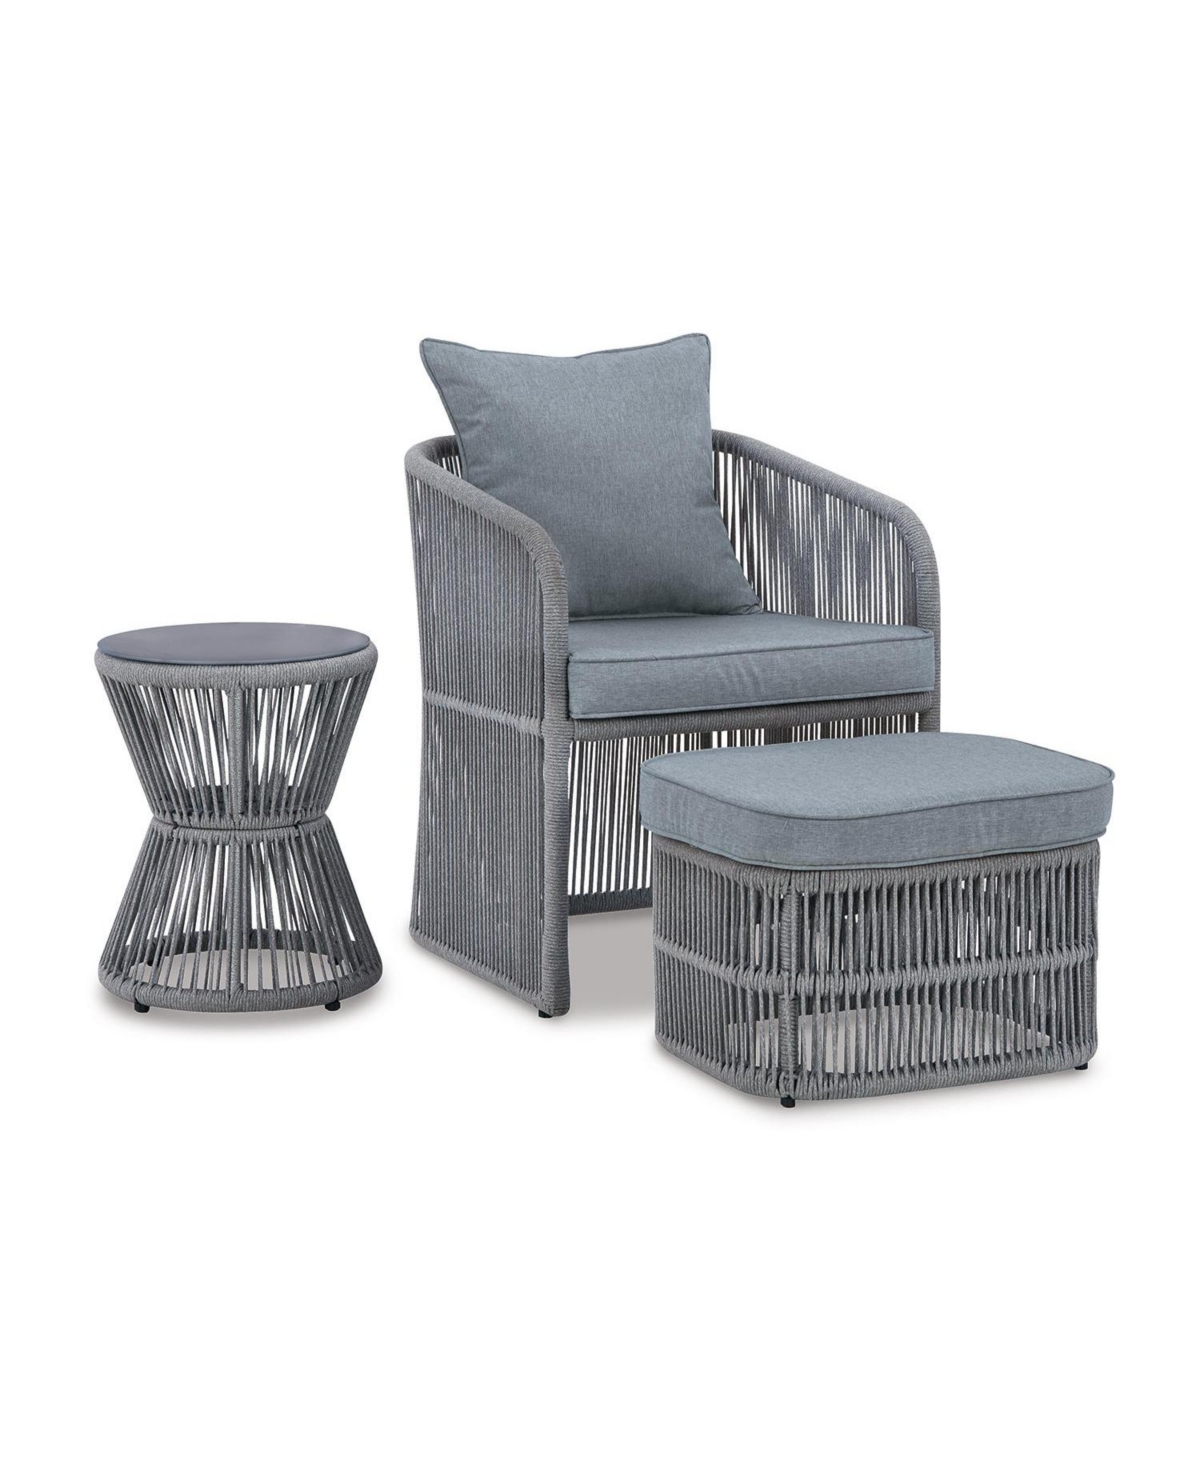 Signature Design By Ashley Coast Island Outdoor Chair, Ottoman And Table, Set Of 3 In Gray